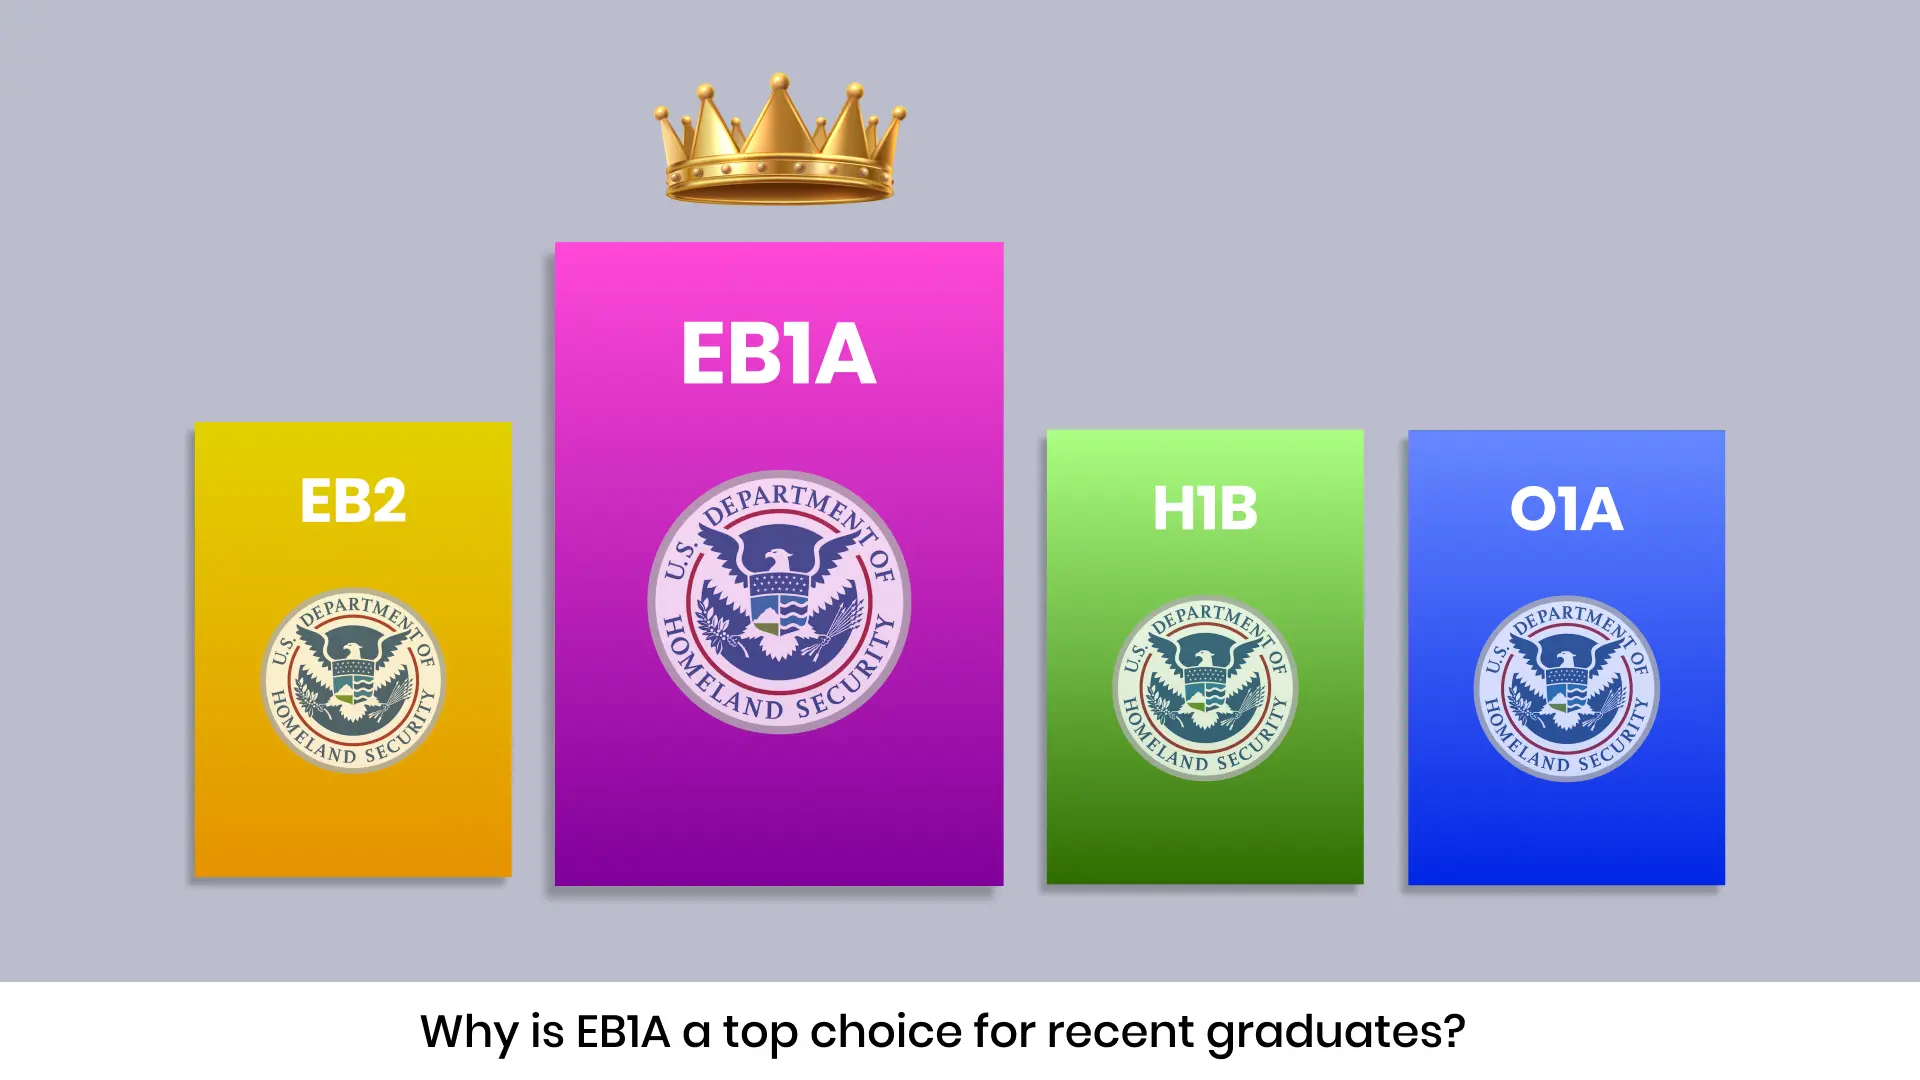 Why is EB1A a top choice for recent graduates?